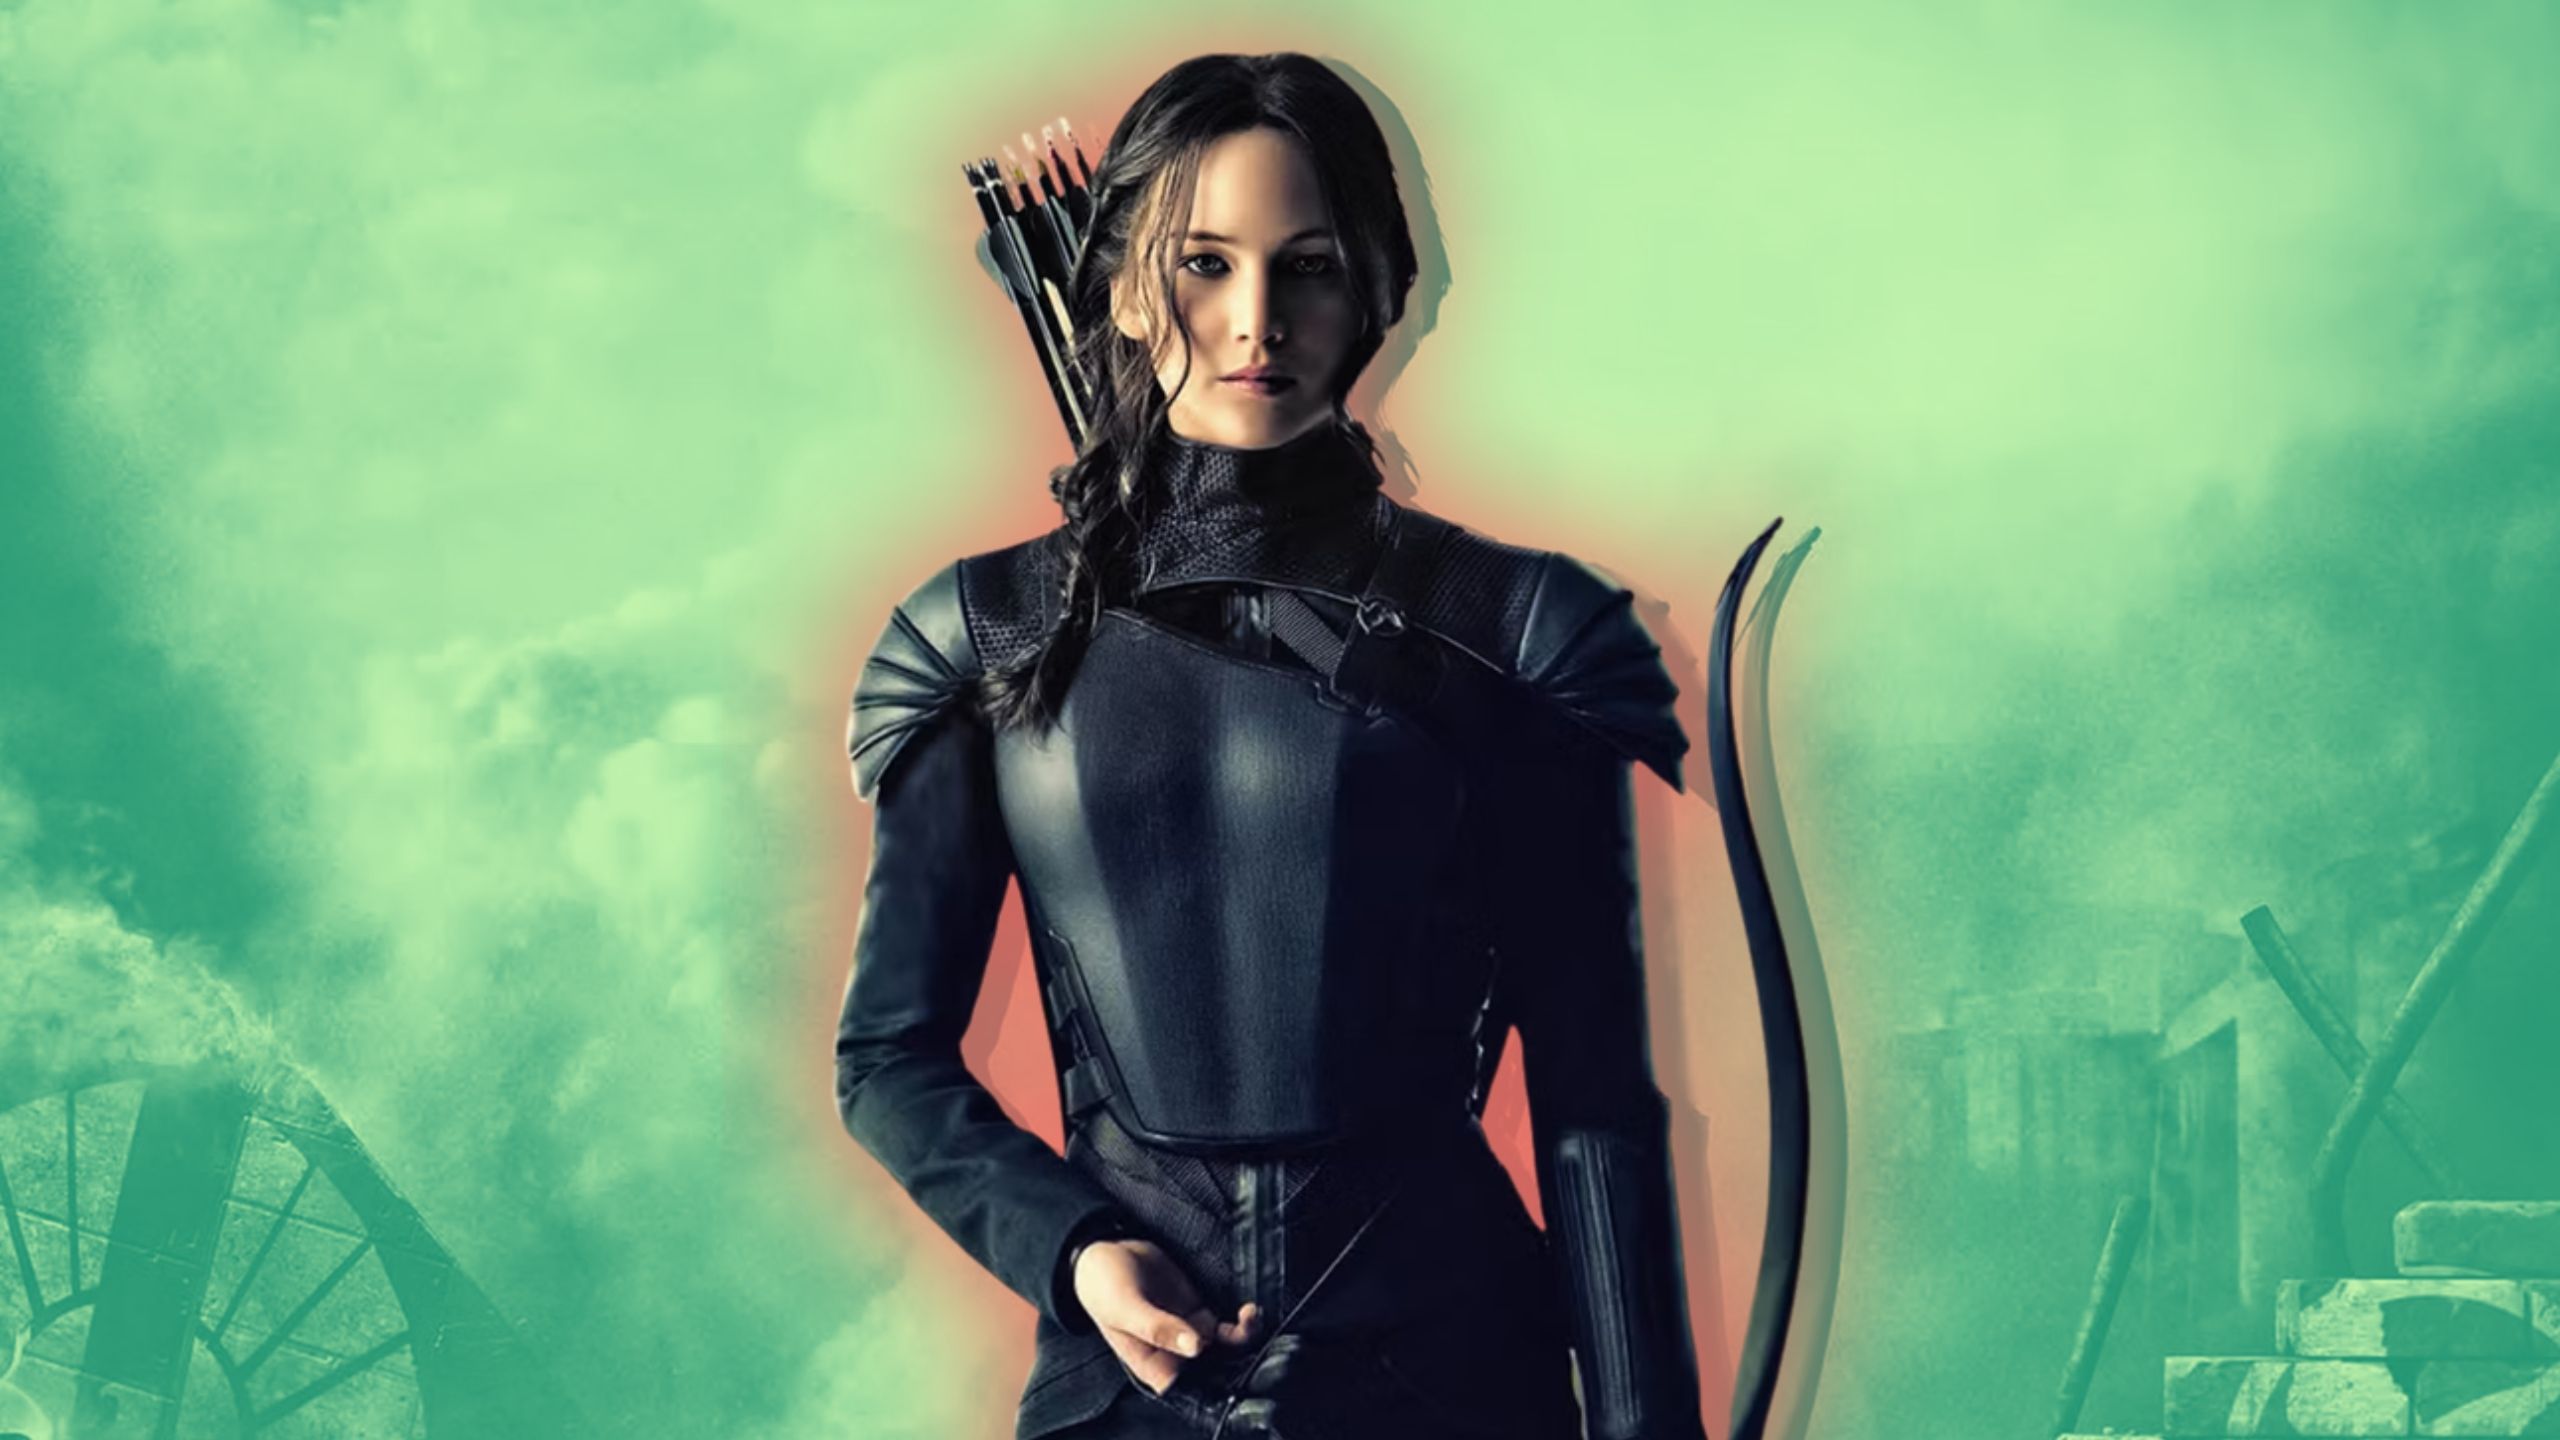 Jennifer Lawerence as Katniss Everdeen in the Hunger Games